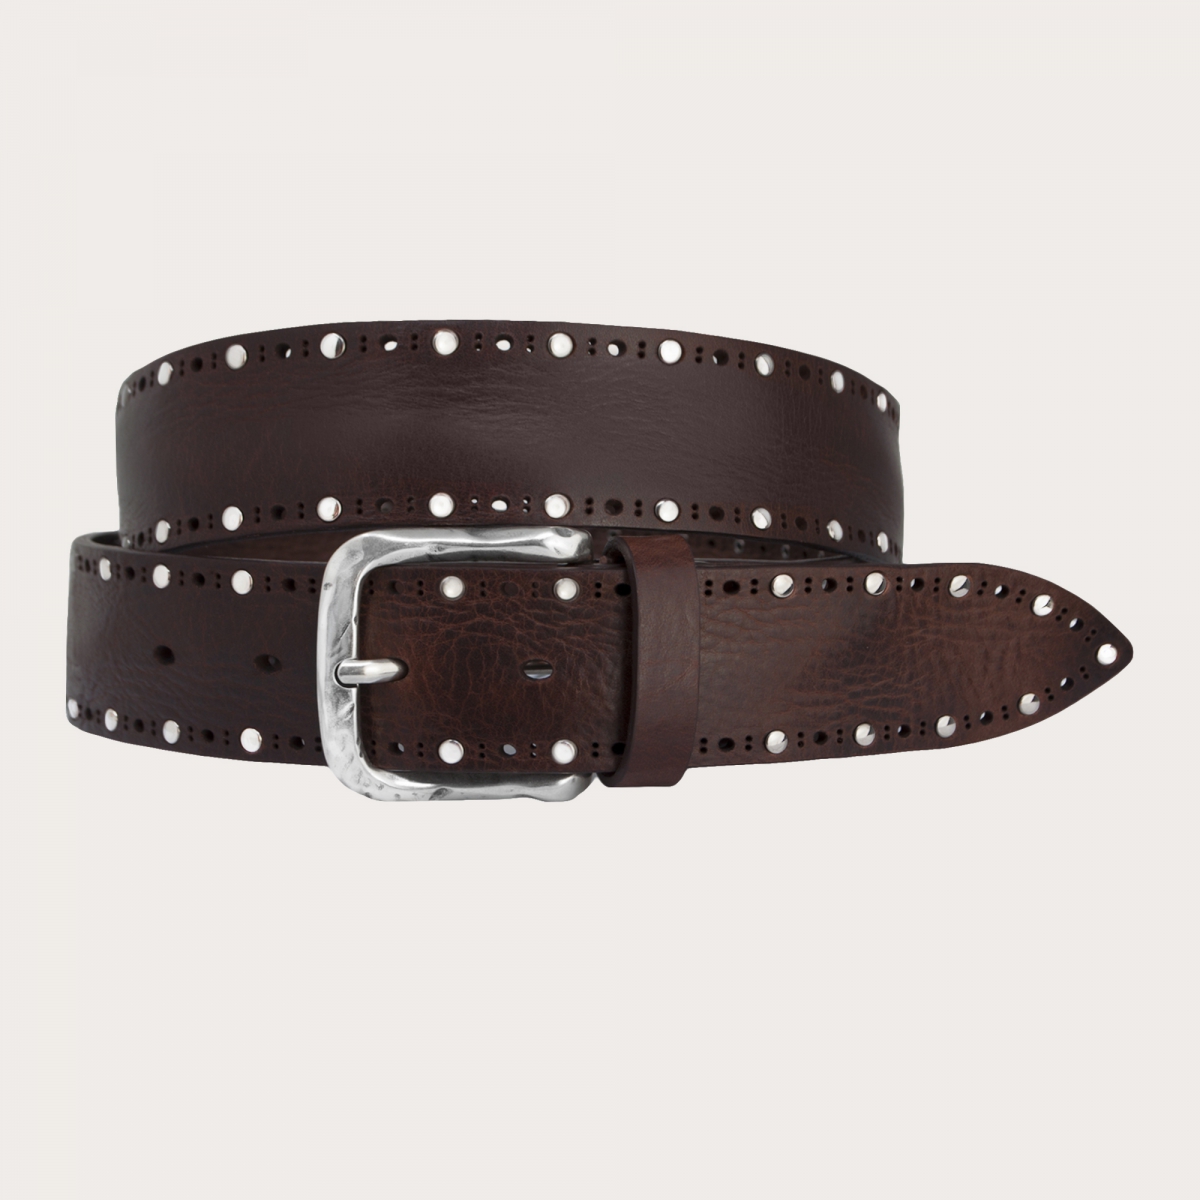 BRUCLE Raw cut leather belt with studs, brown